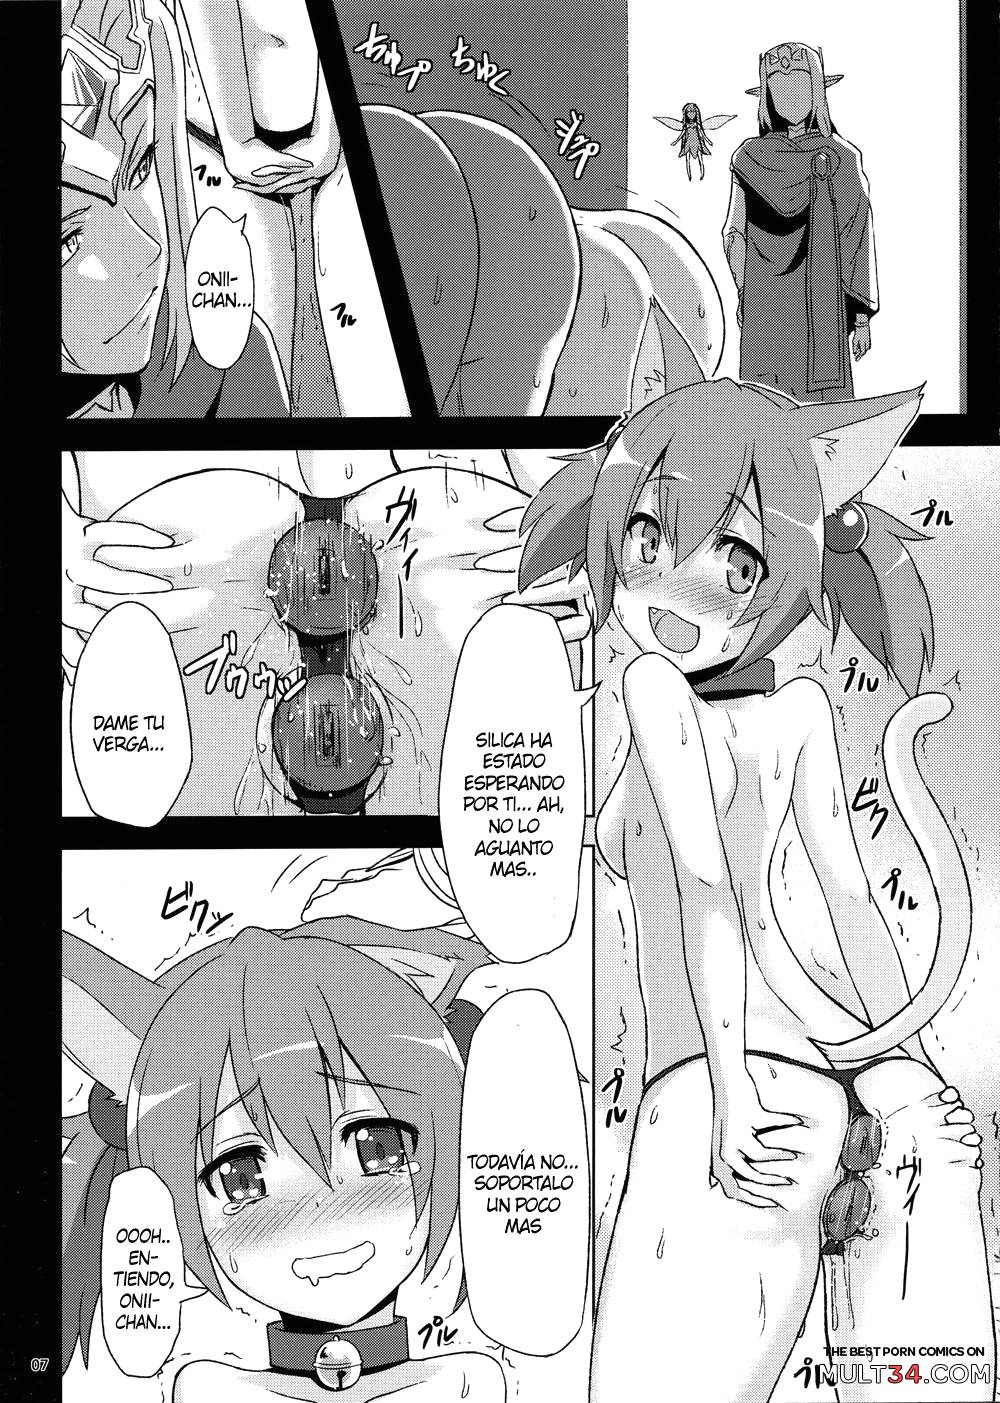 BAD END HEAVEN page 4